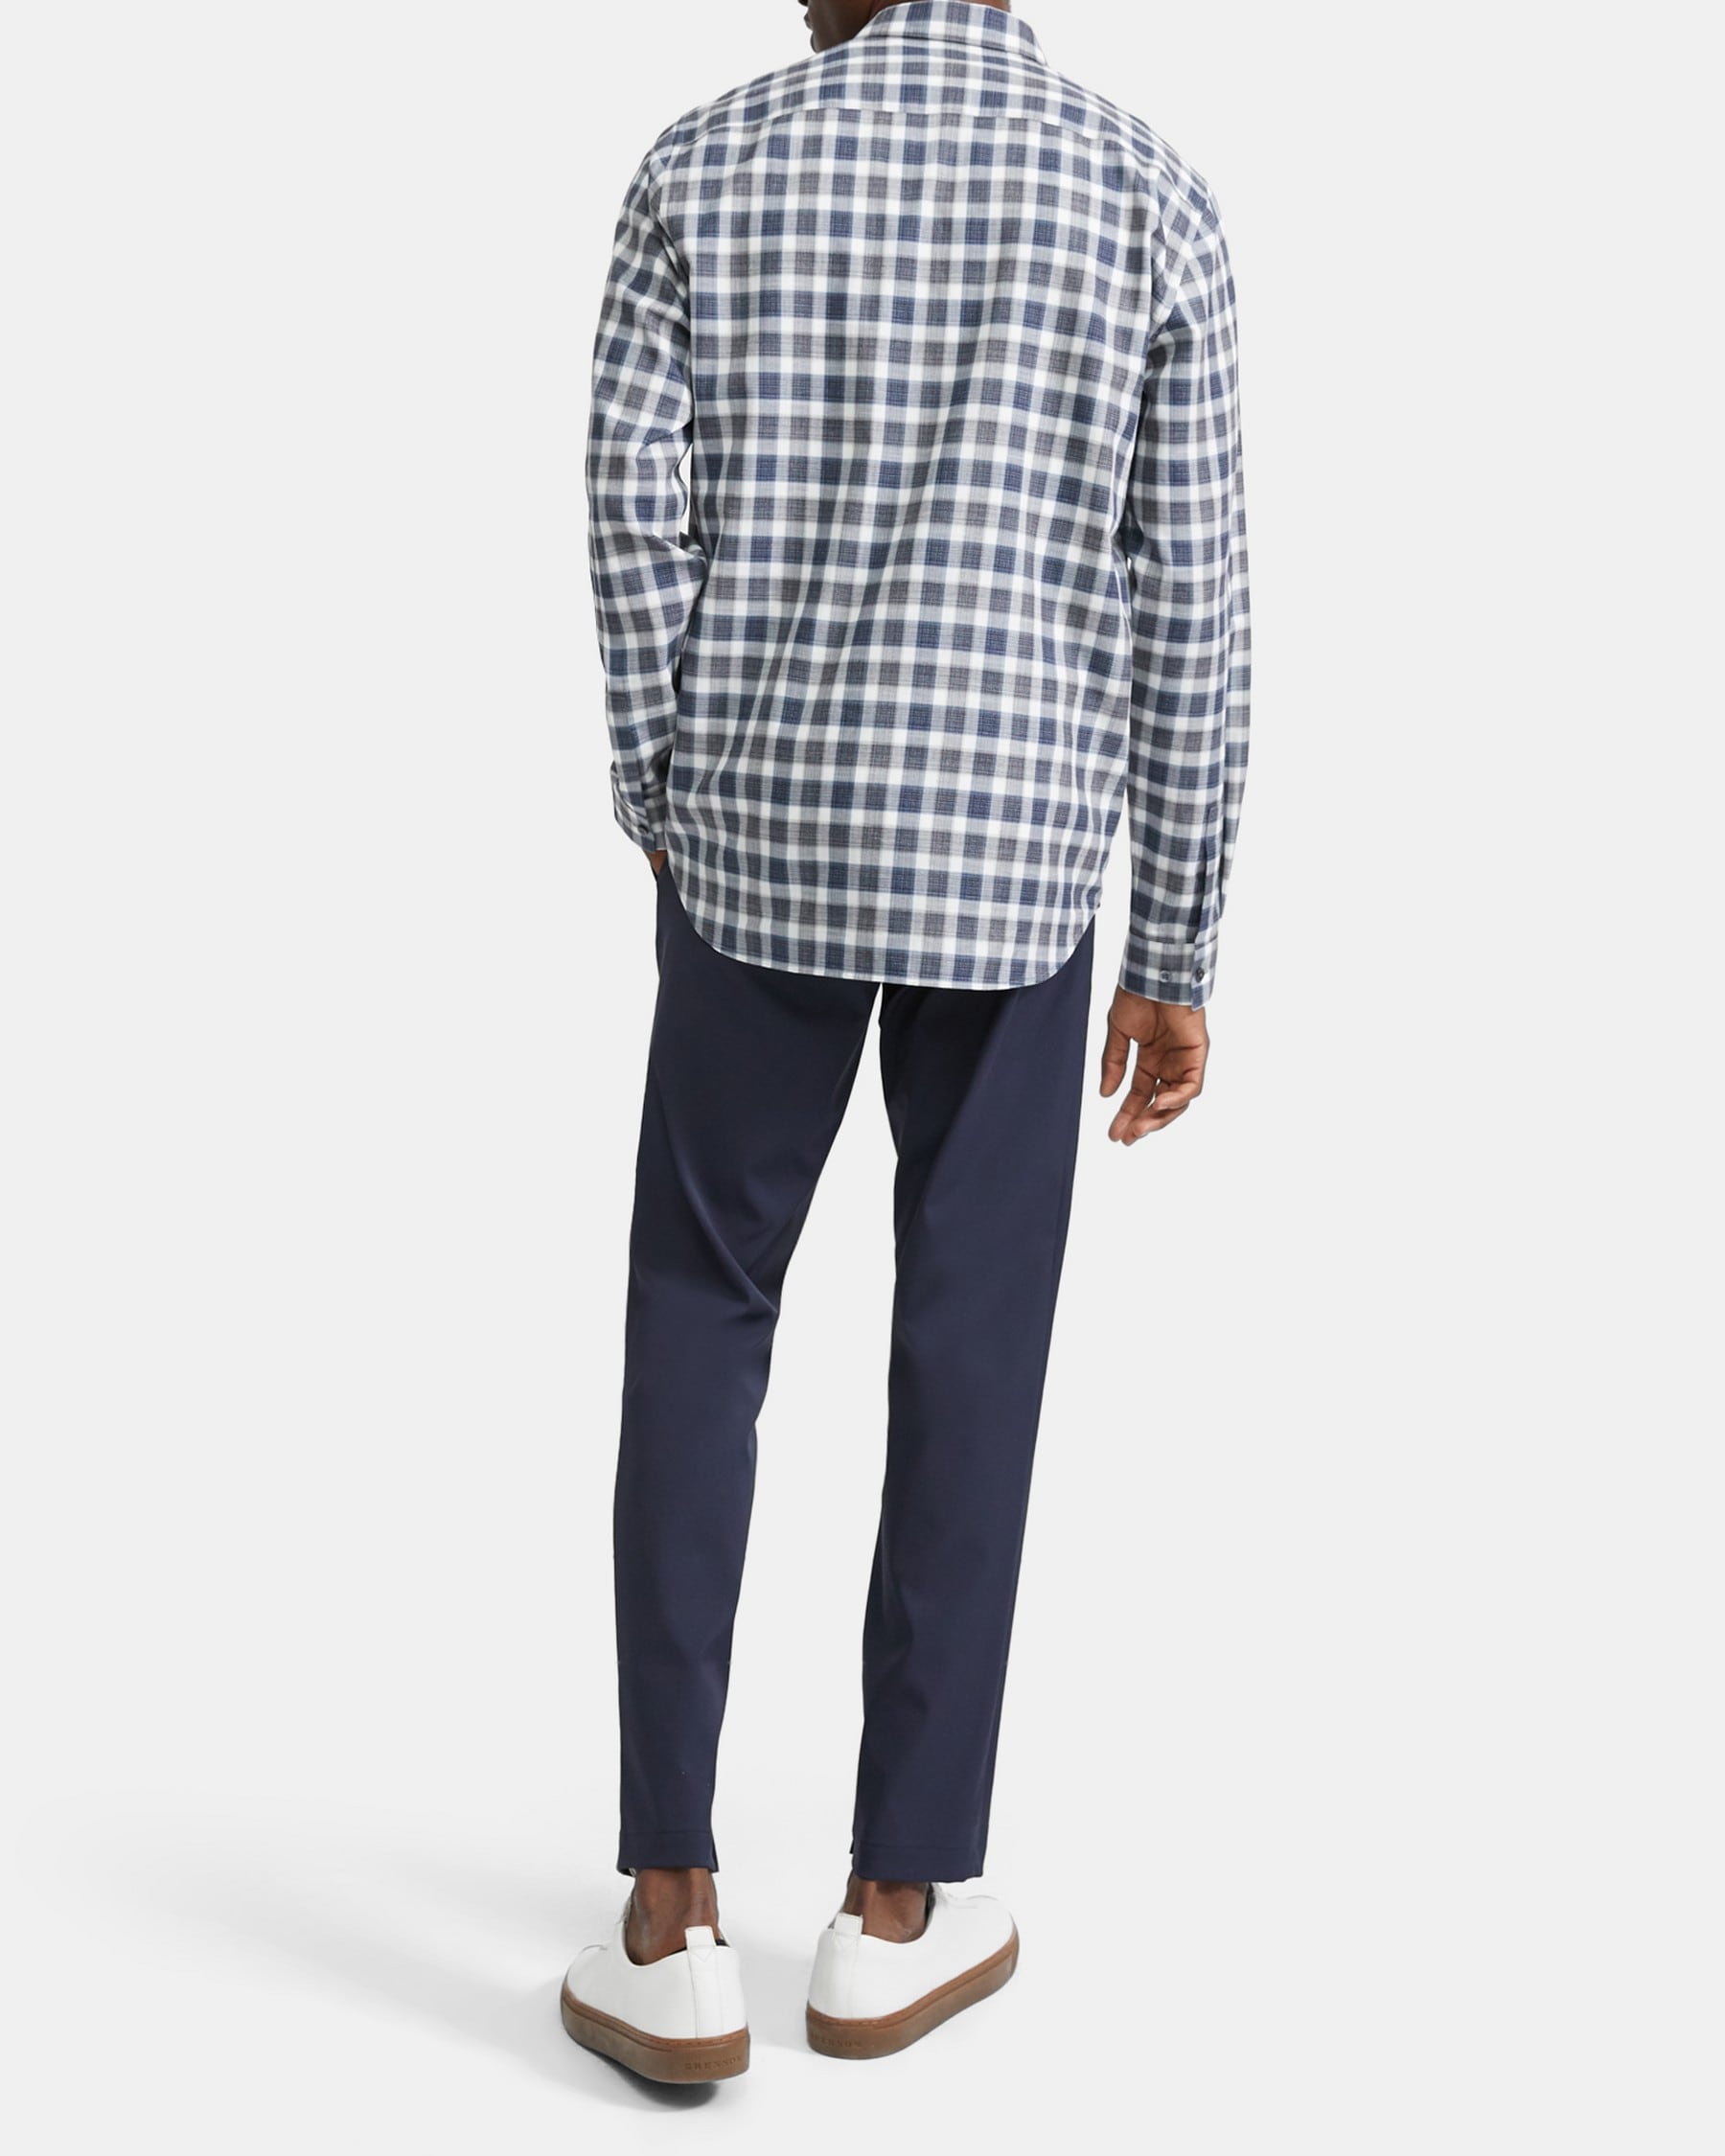 Standard-Fit Shirt in Check Cotton